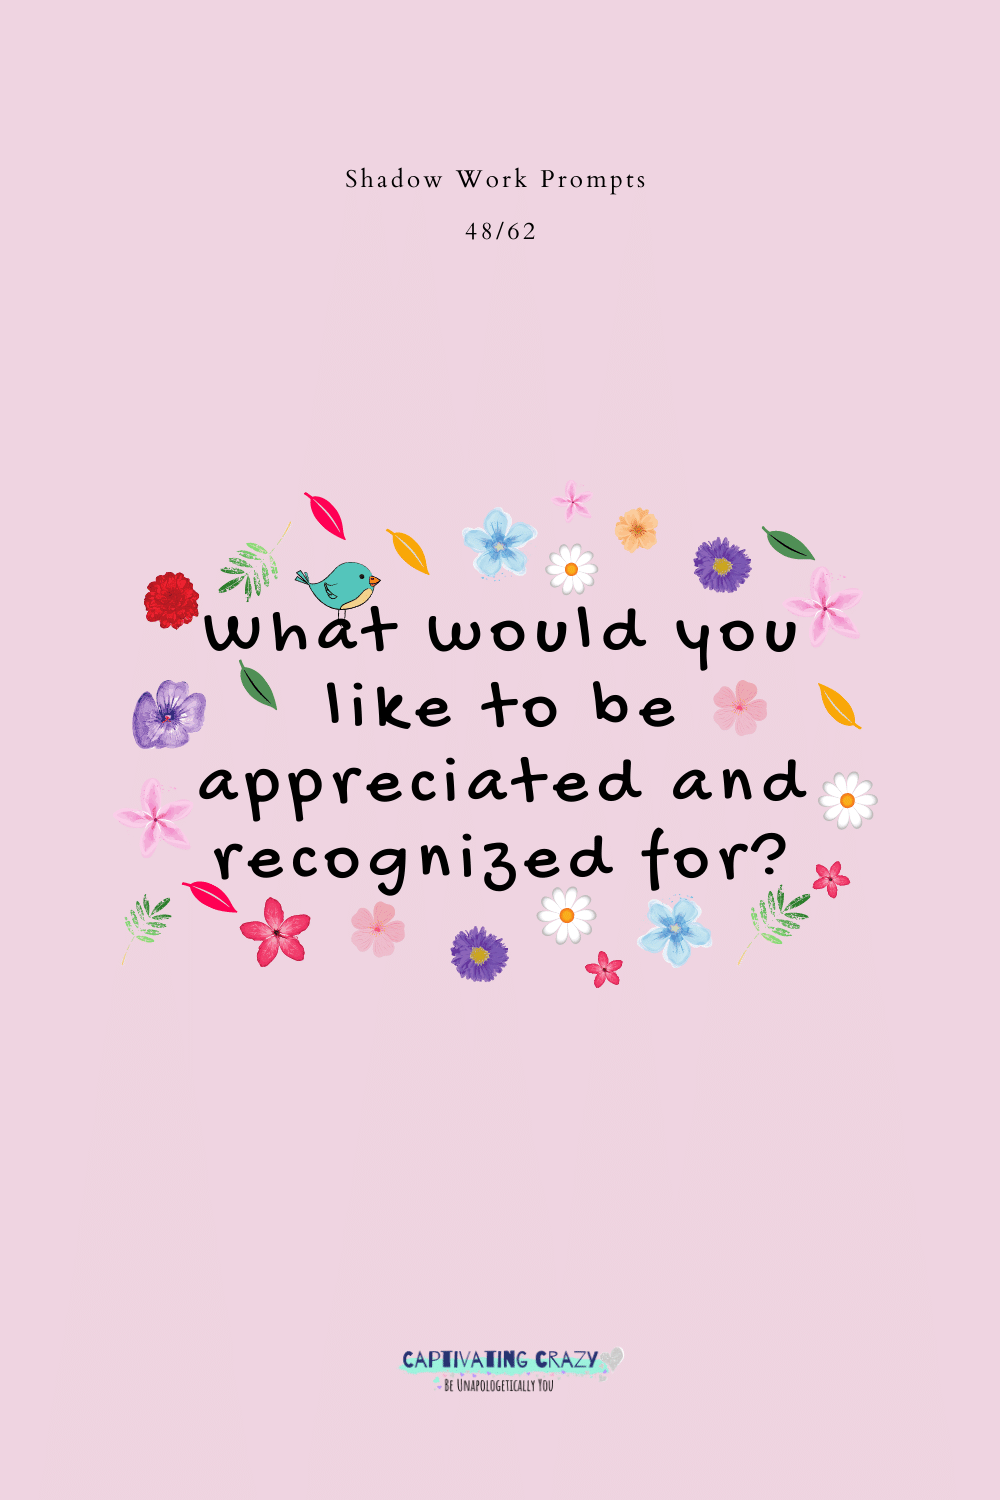 What would you like to be appreciated and recognized for?